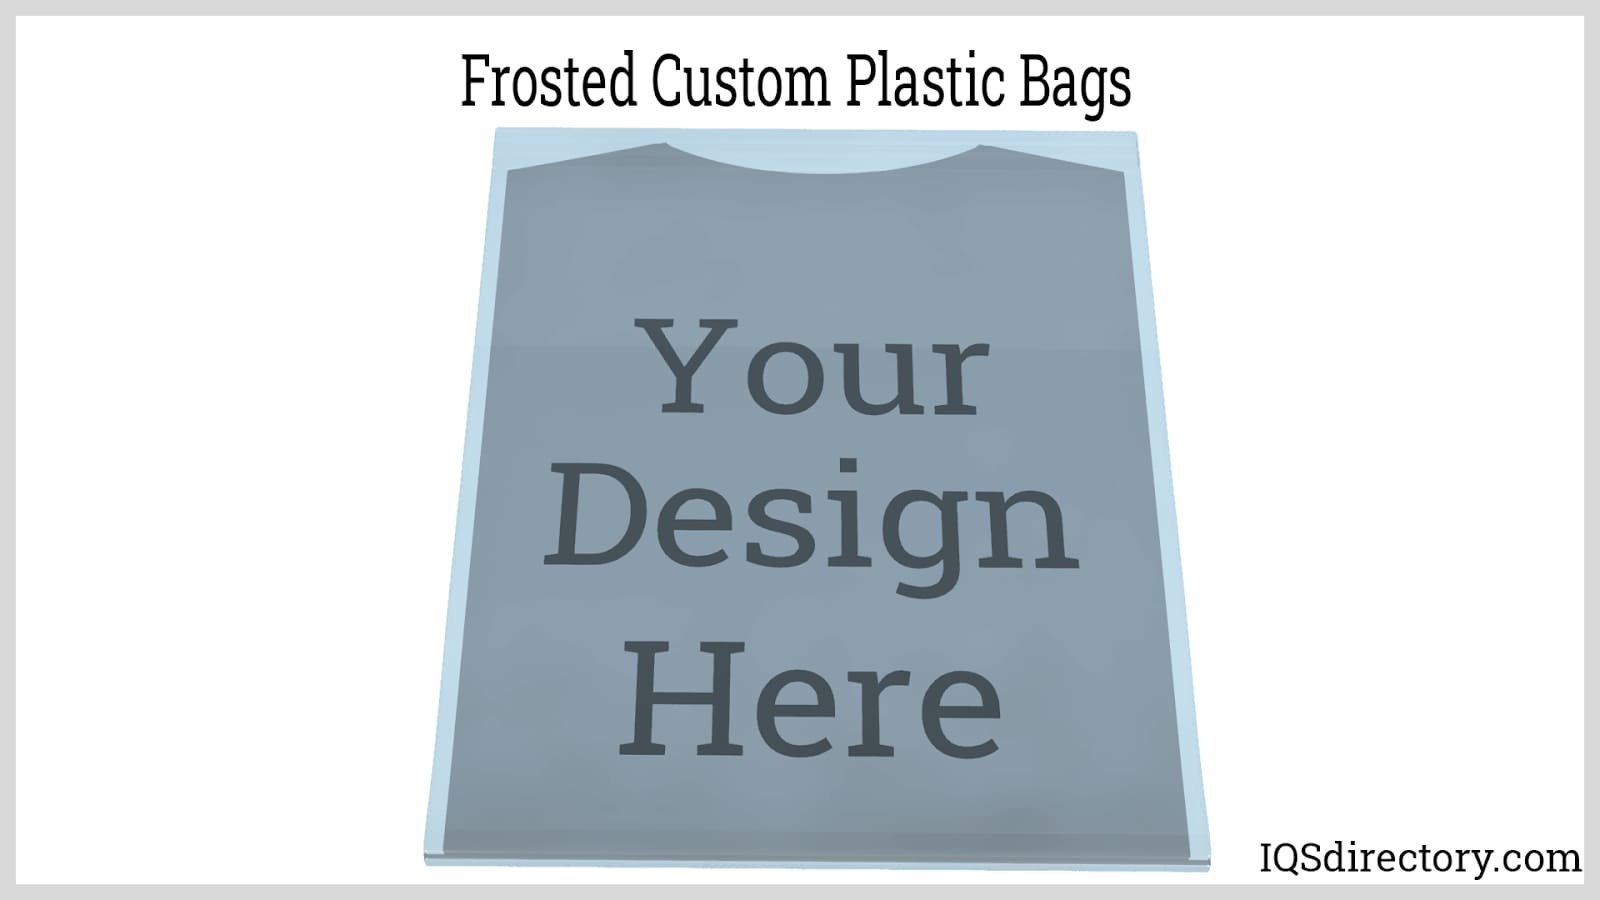 Frosted Custom Plastic Bags